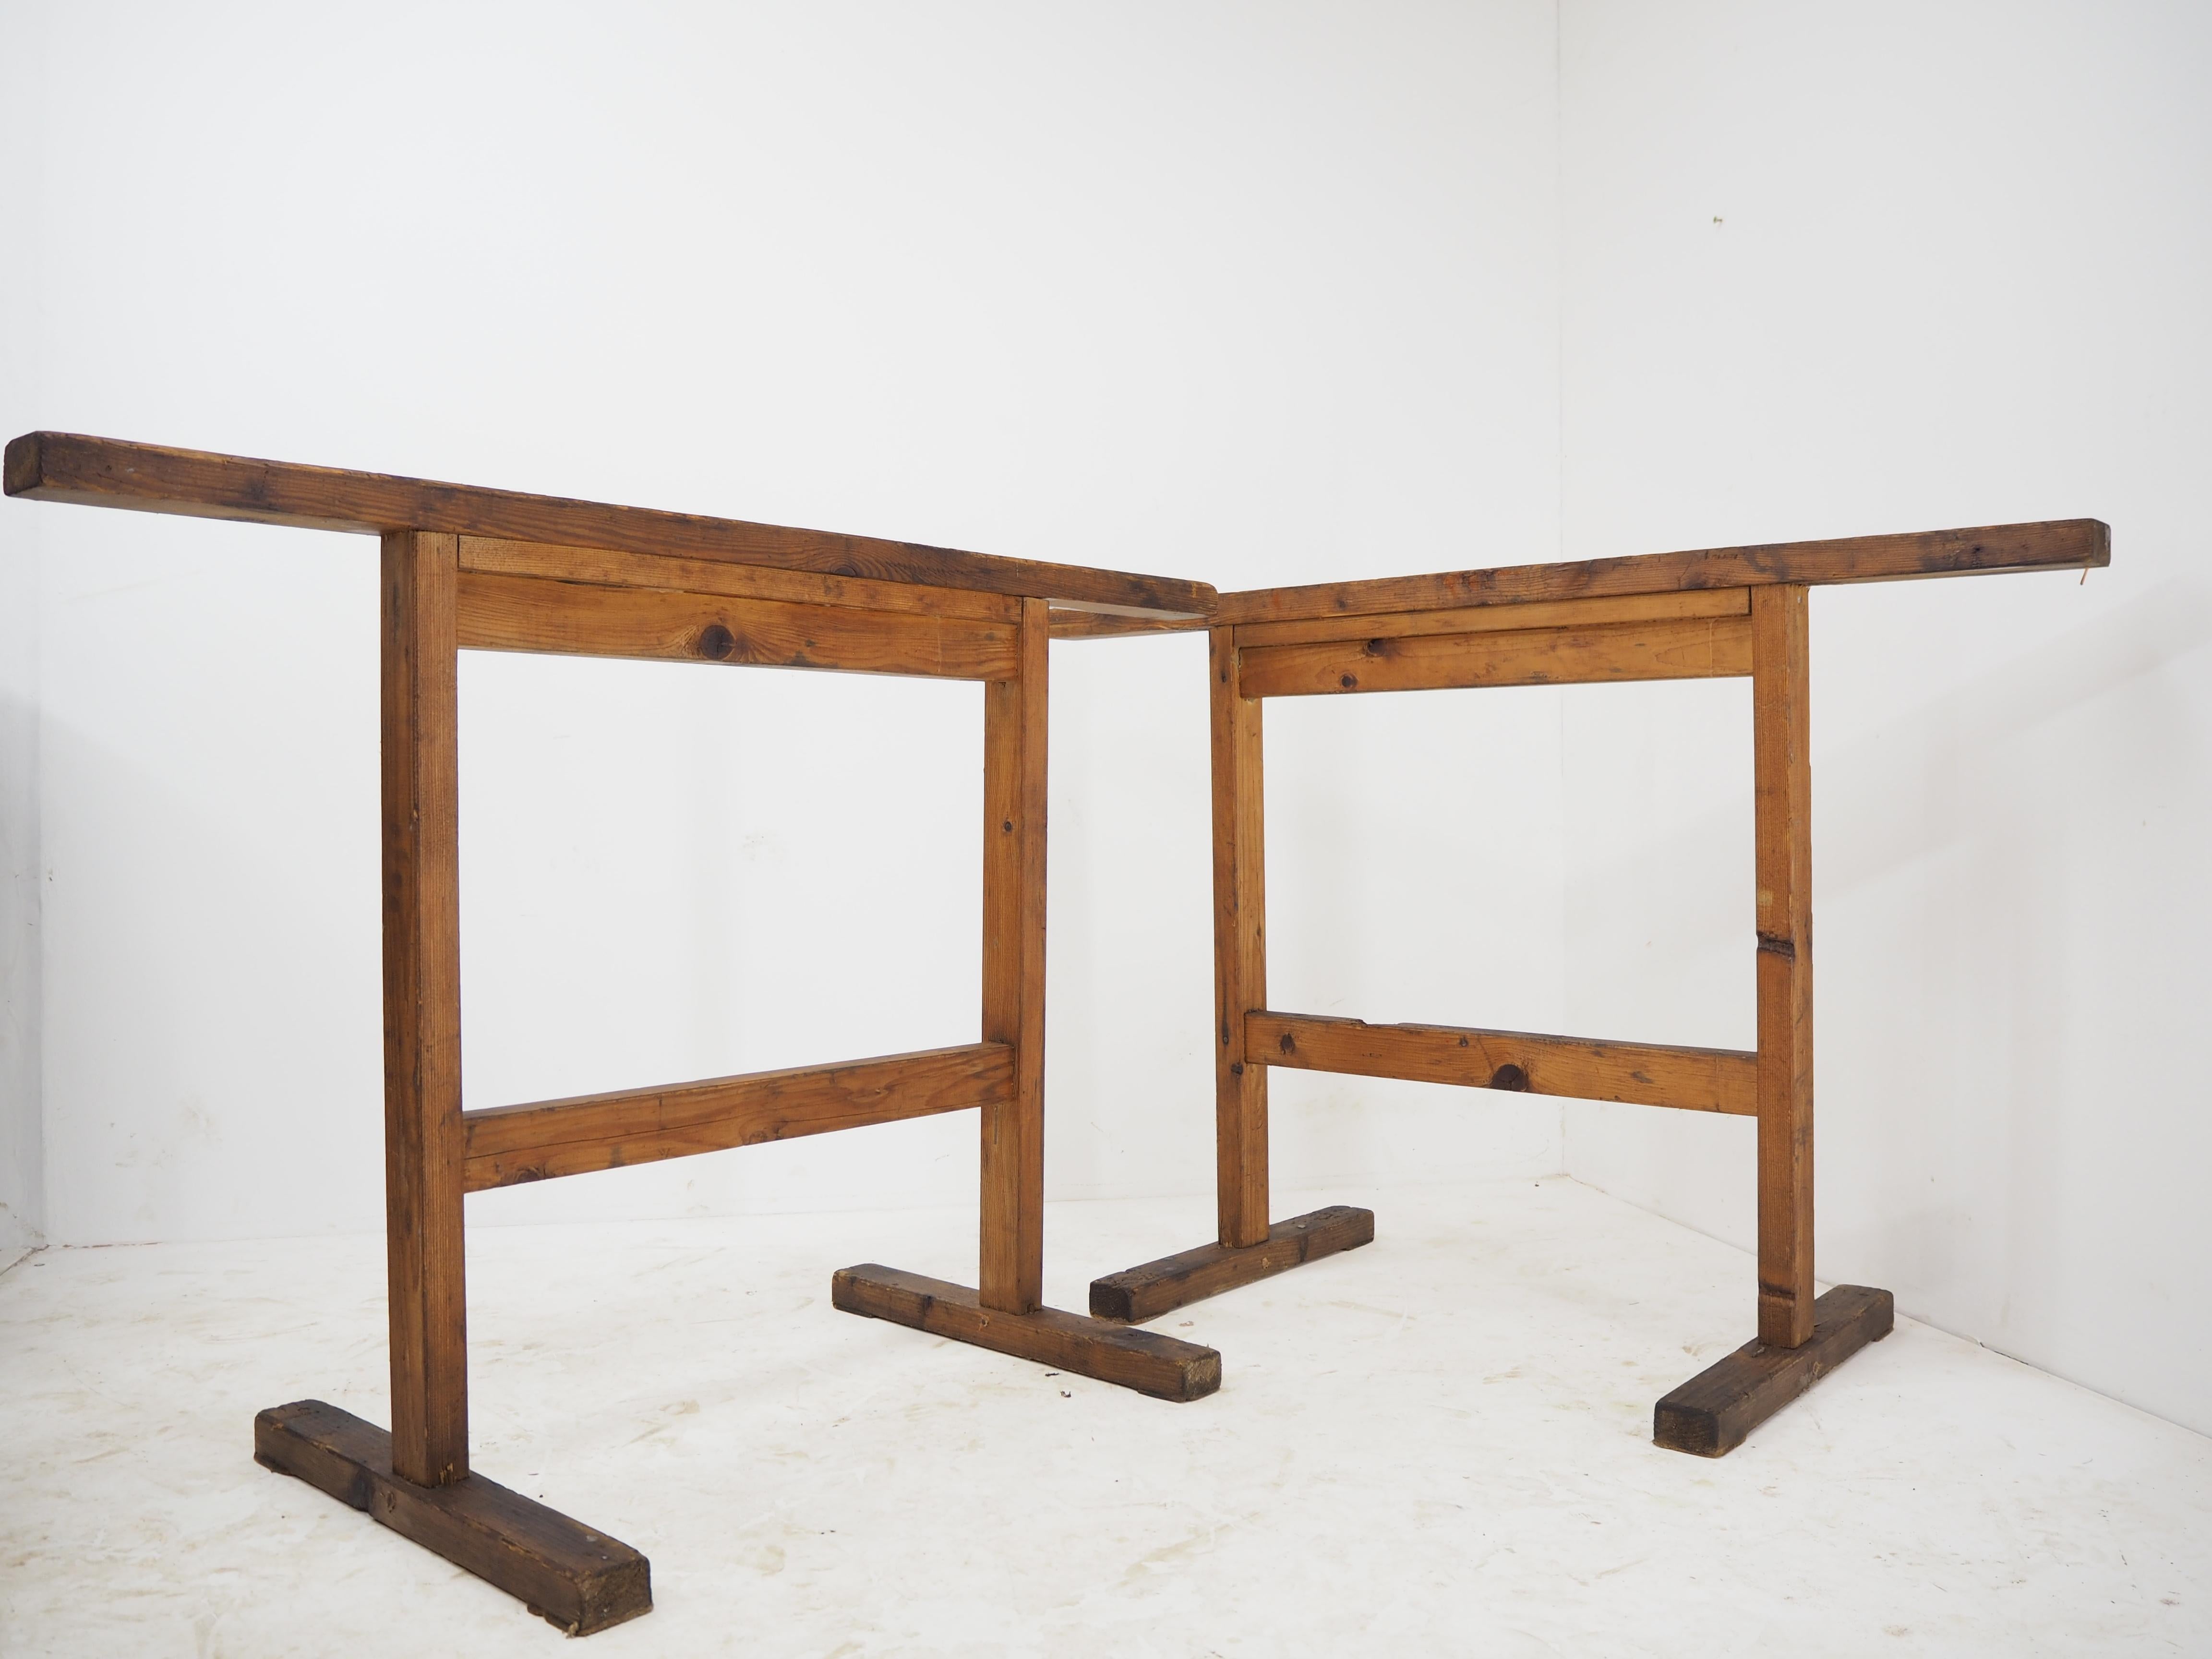 Pair of wooden trestles with original patina
Czechoslovakia 
Cleaned and sealed with a special oil.
In original condition.